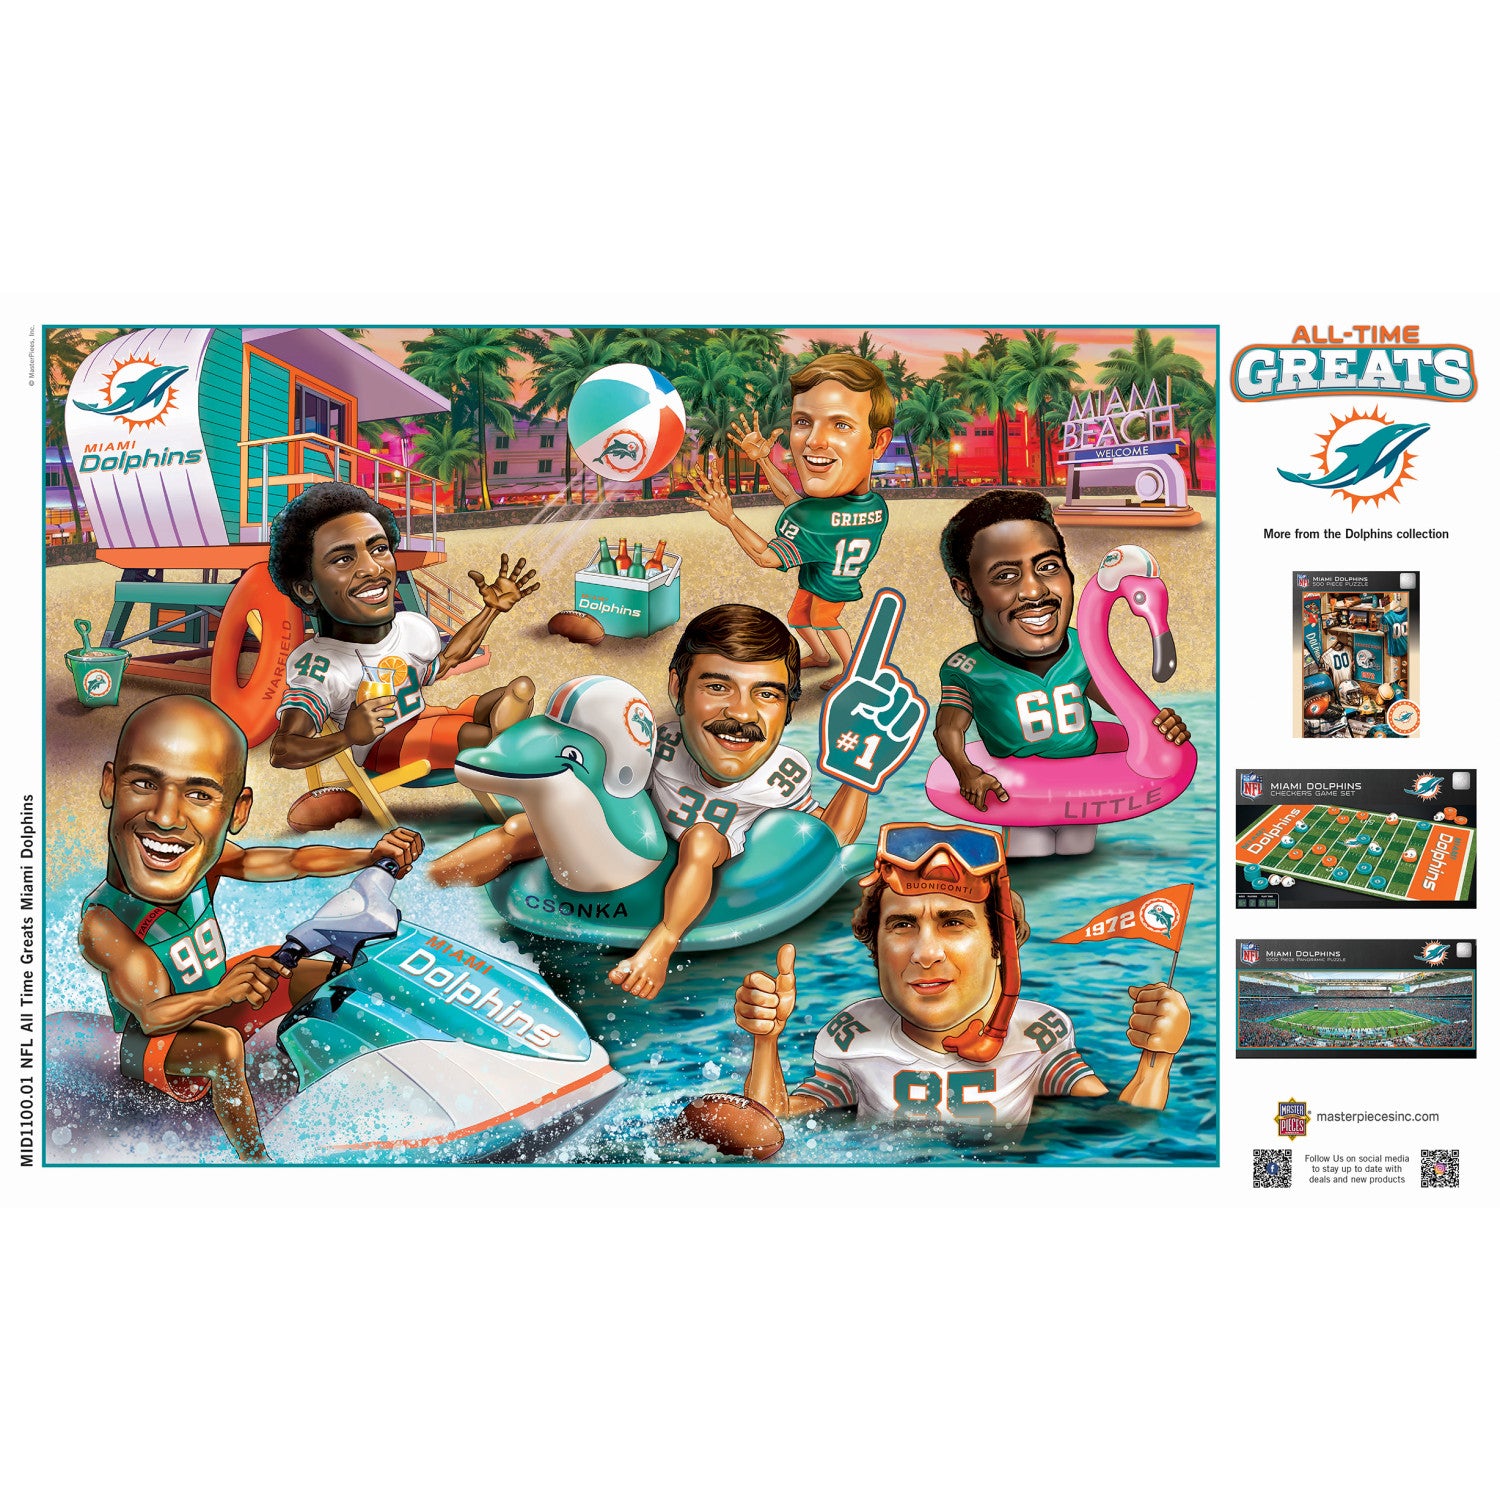 Miami Dolphins - All Time Greats 500 Piece Jigsaw Puzzle